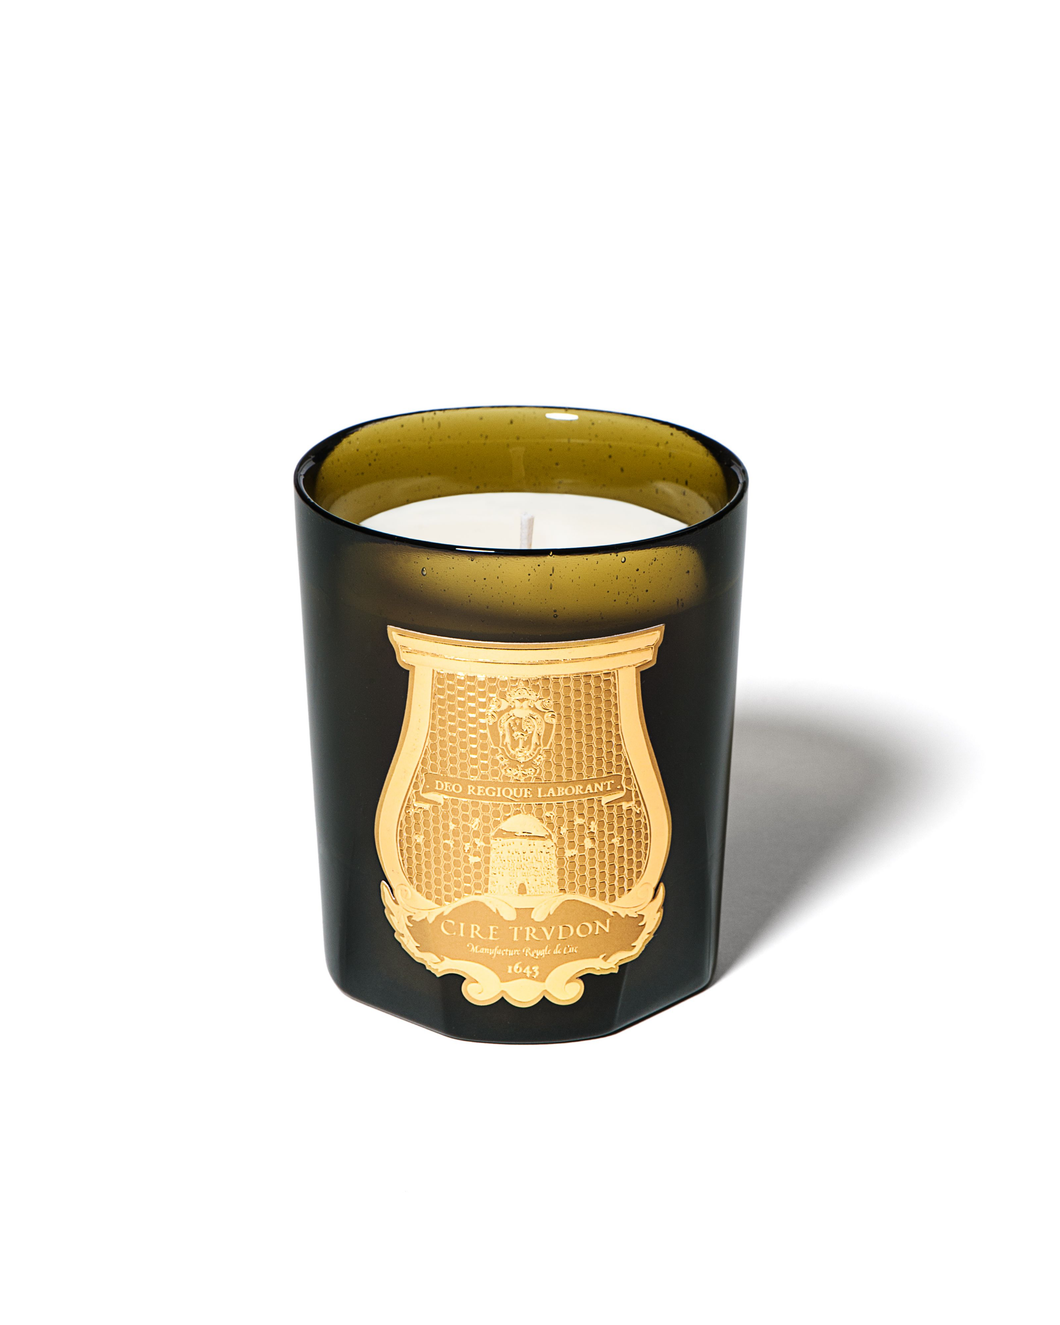 ERNESTO: LEATHER AND TOBACCO CANDLE